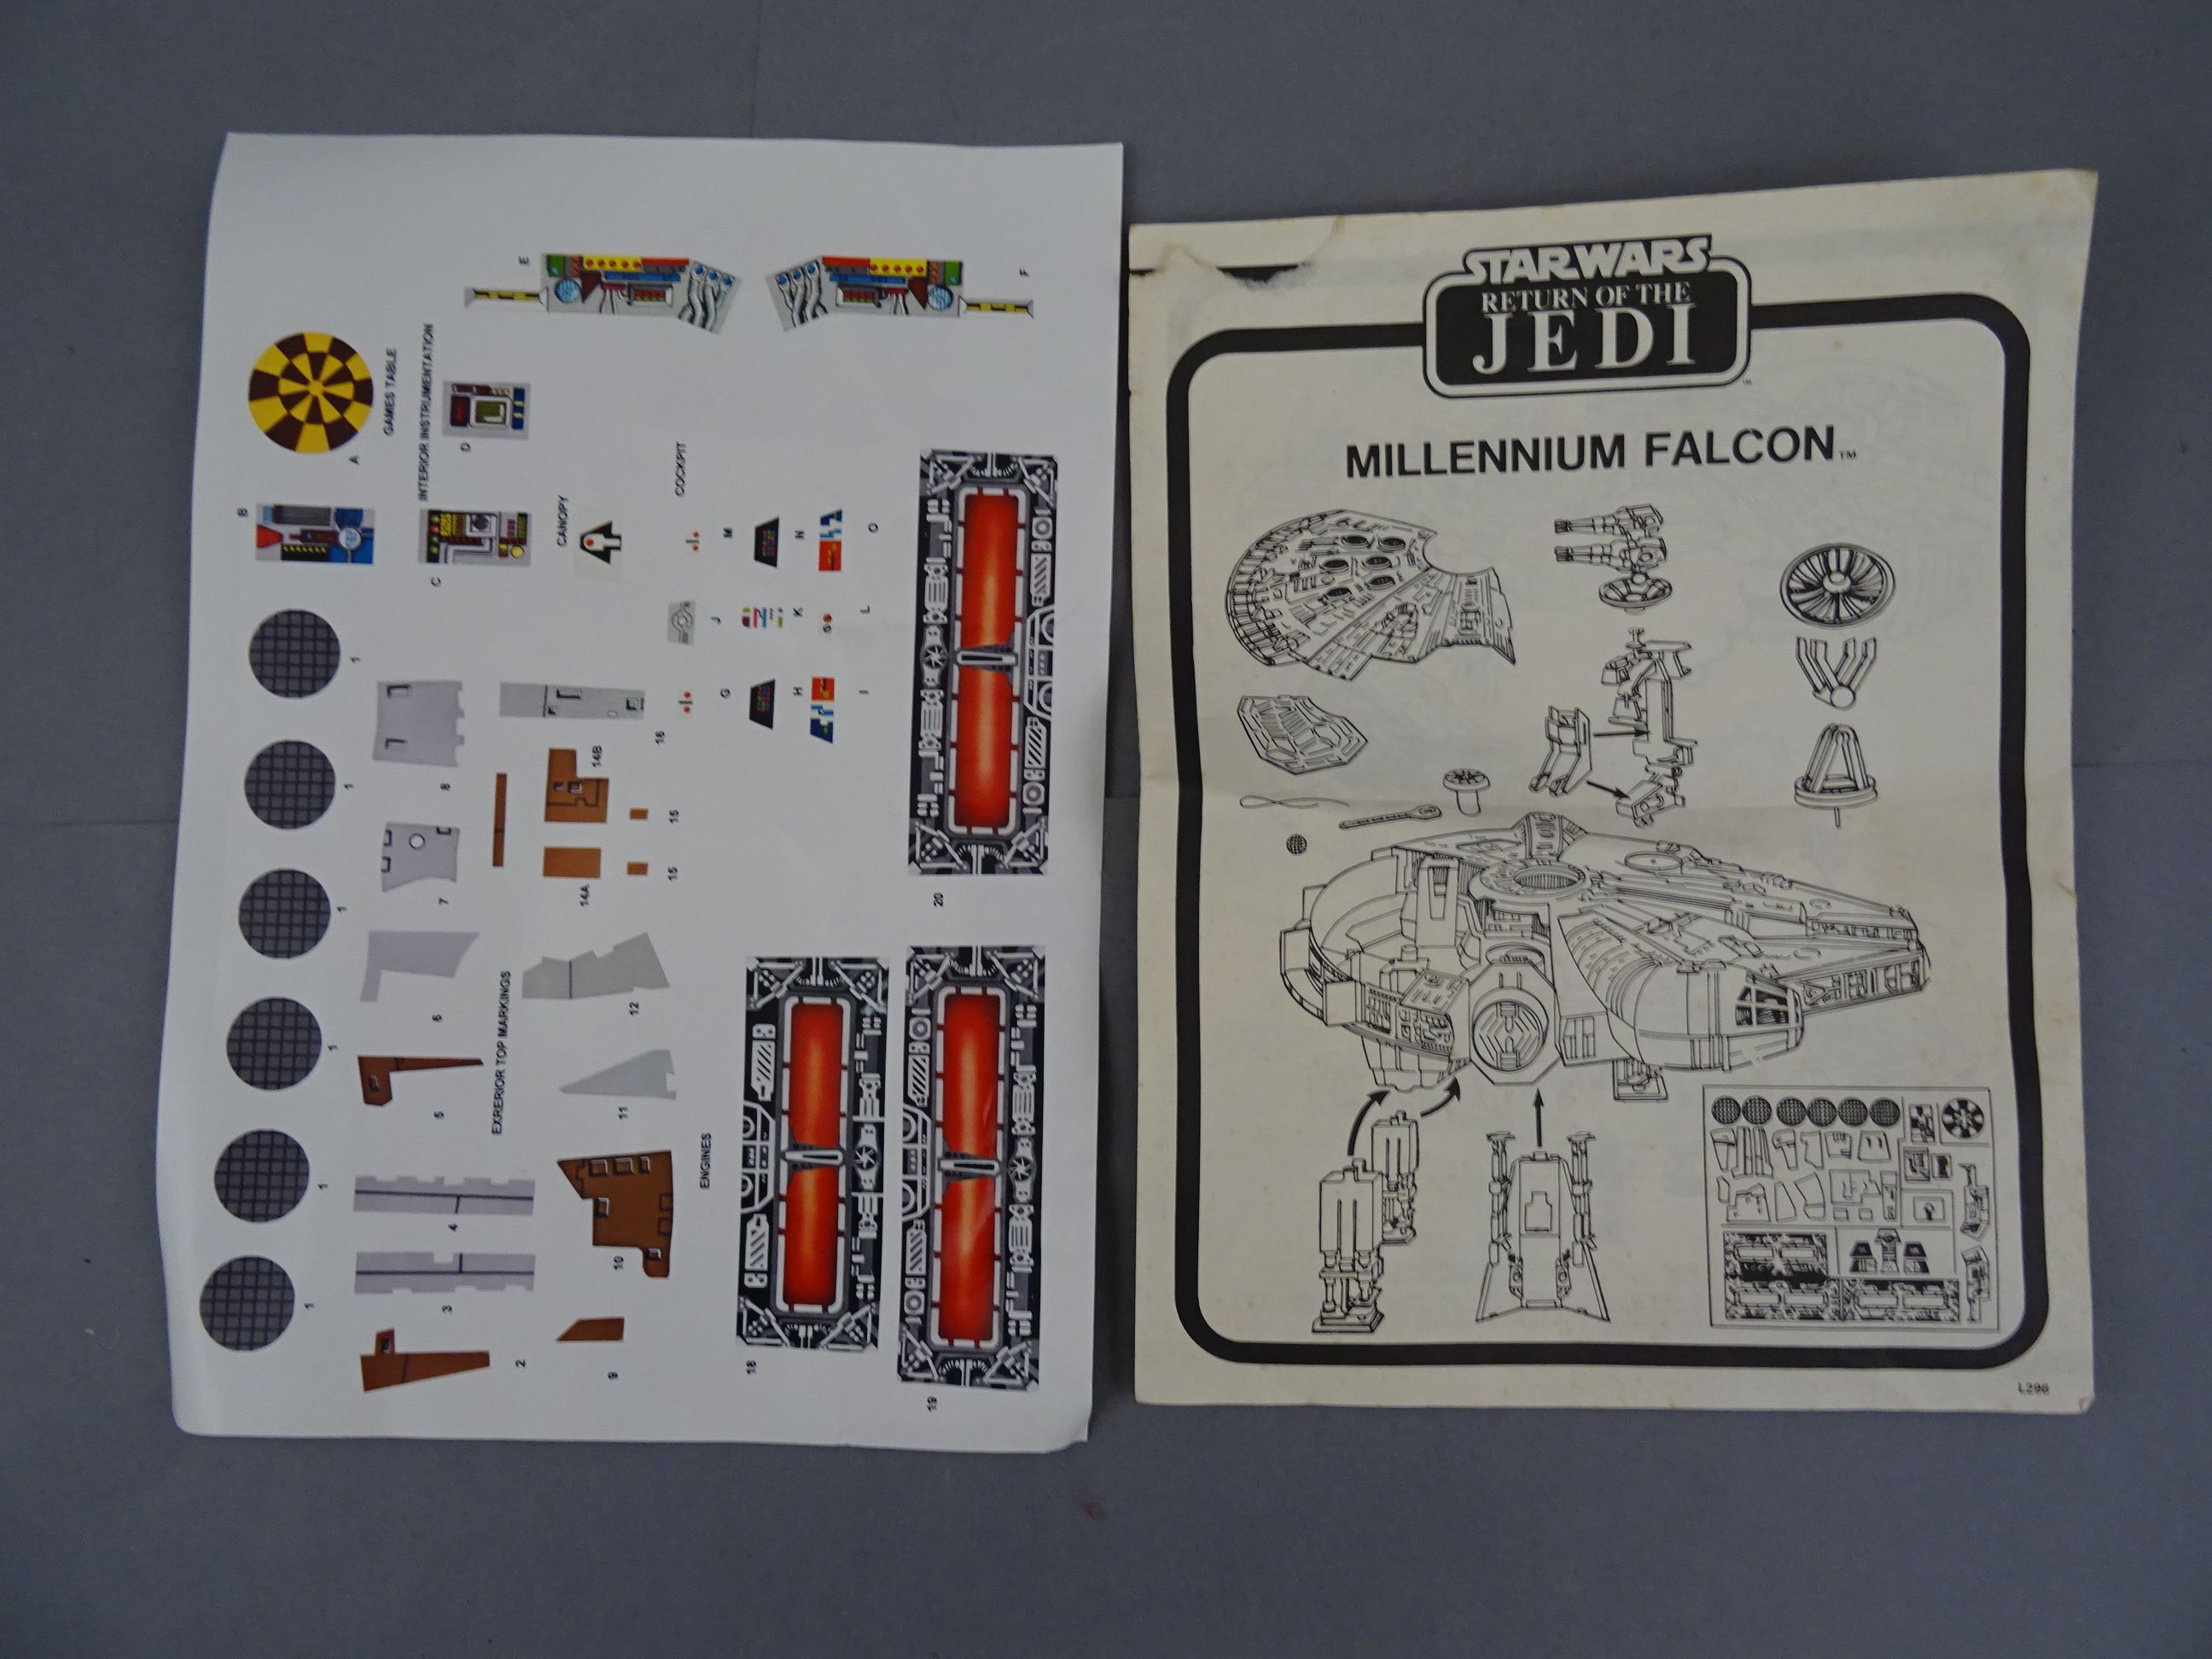 Star Wars - Original boxed Palitoy Star Wars Return of the Jedi Millennium Falcon Vehicle in good - Image 10 of 11